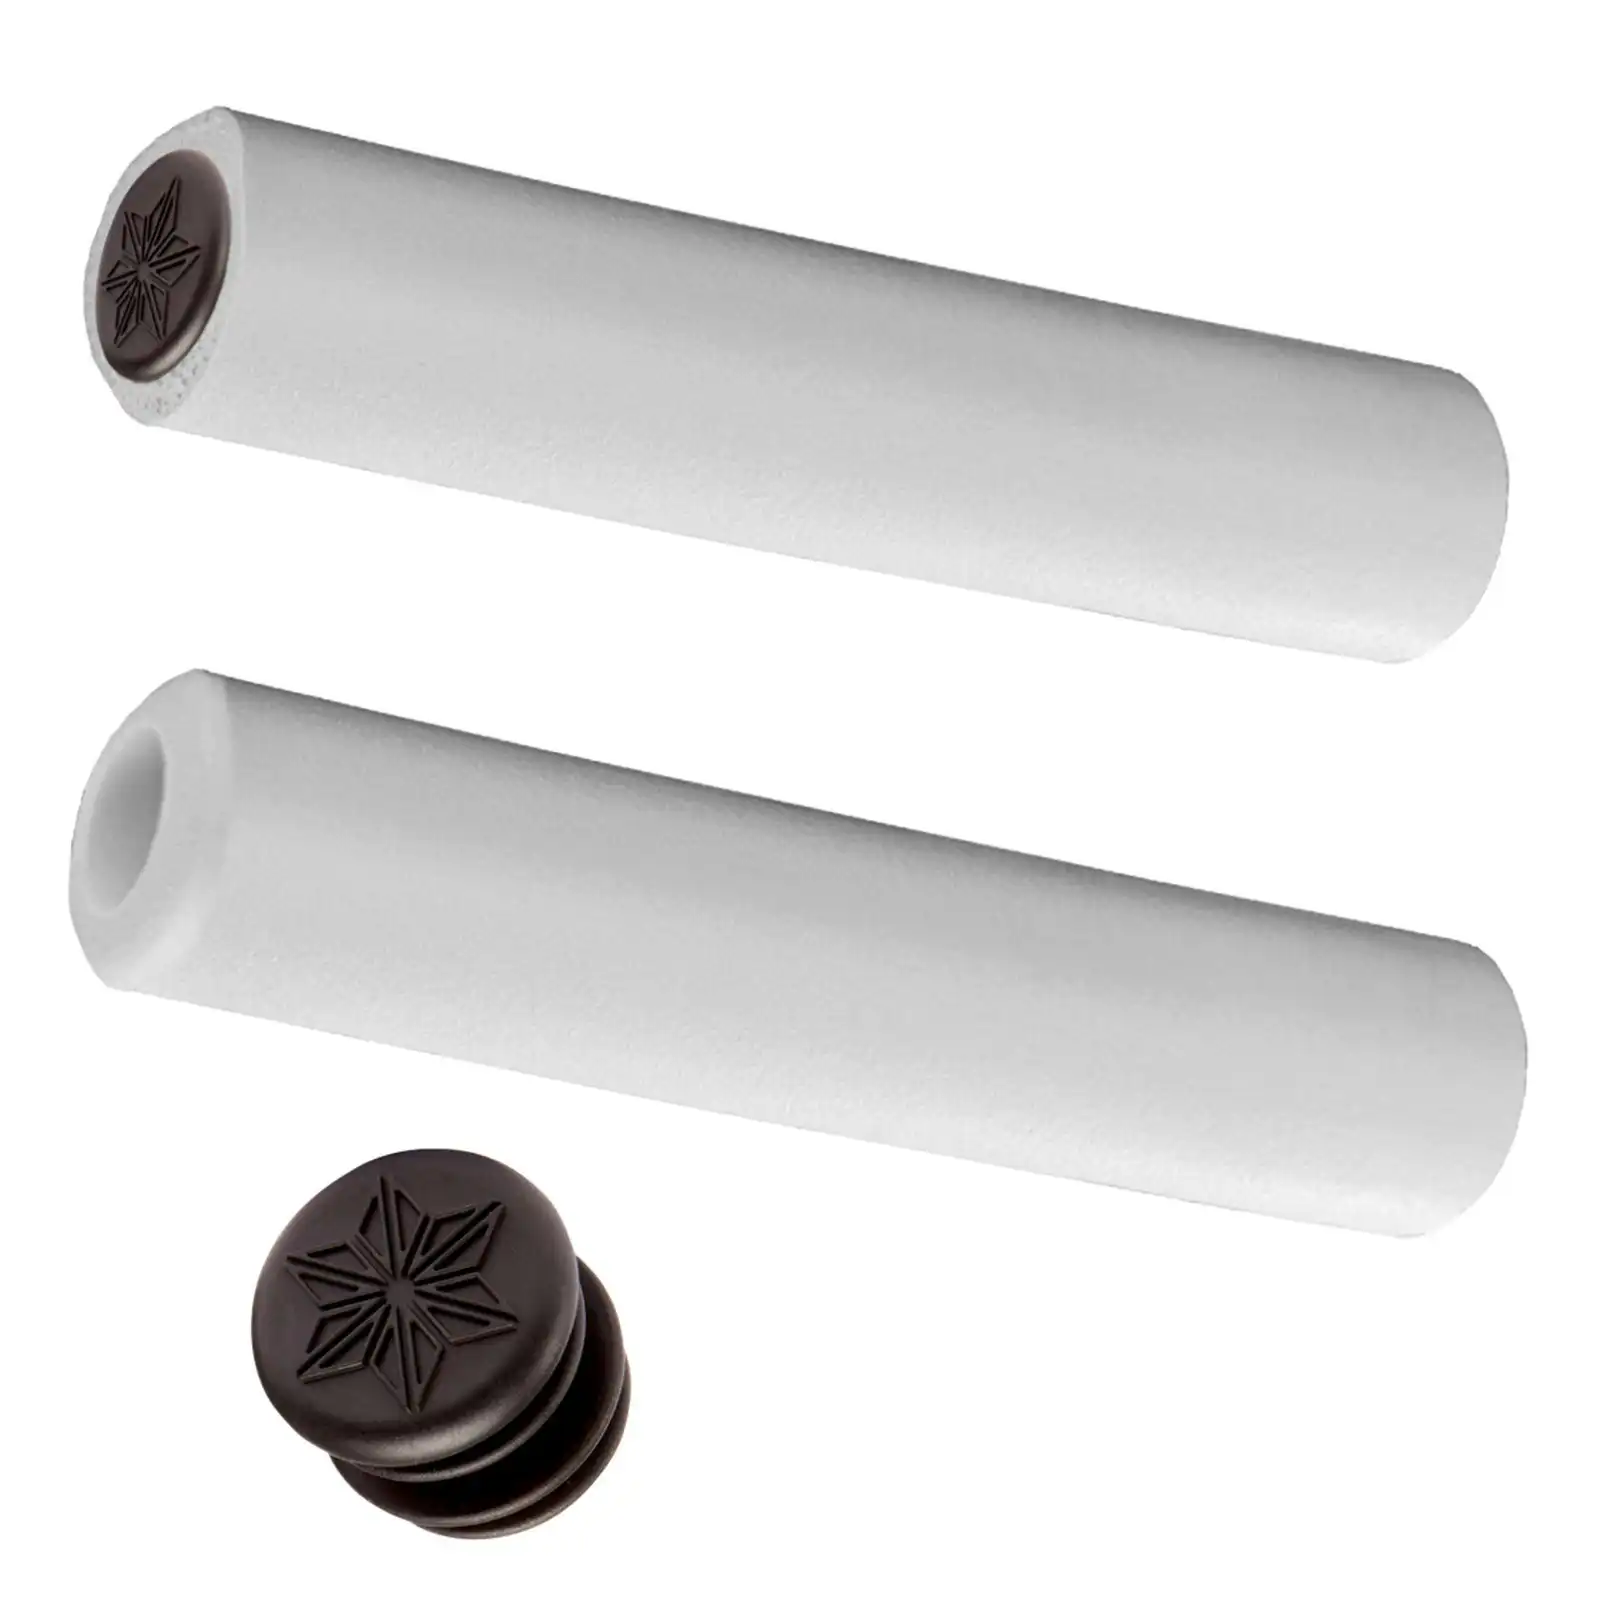 Livingstone Recyclable Plastic BAR GRIP FOR WCFS874